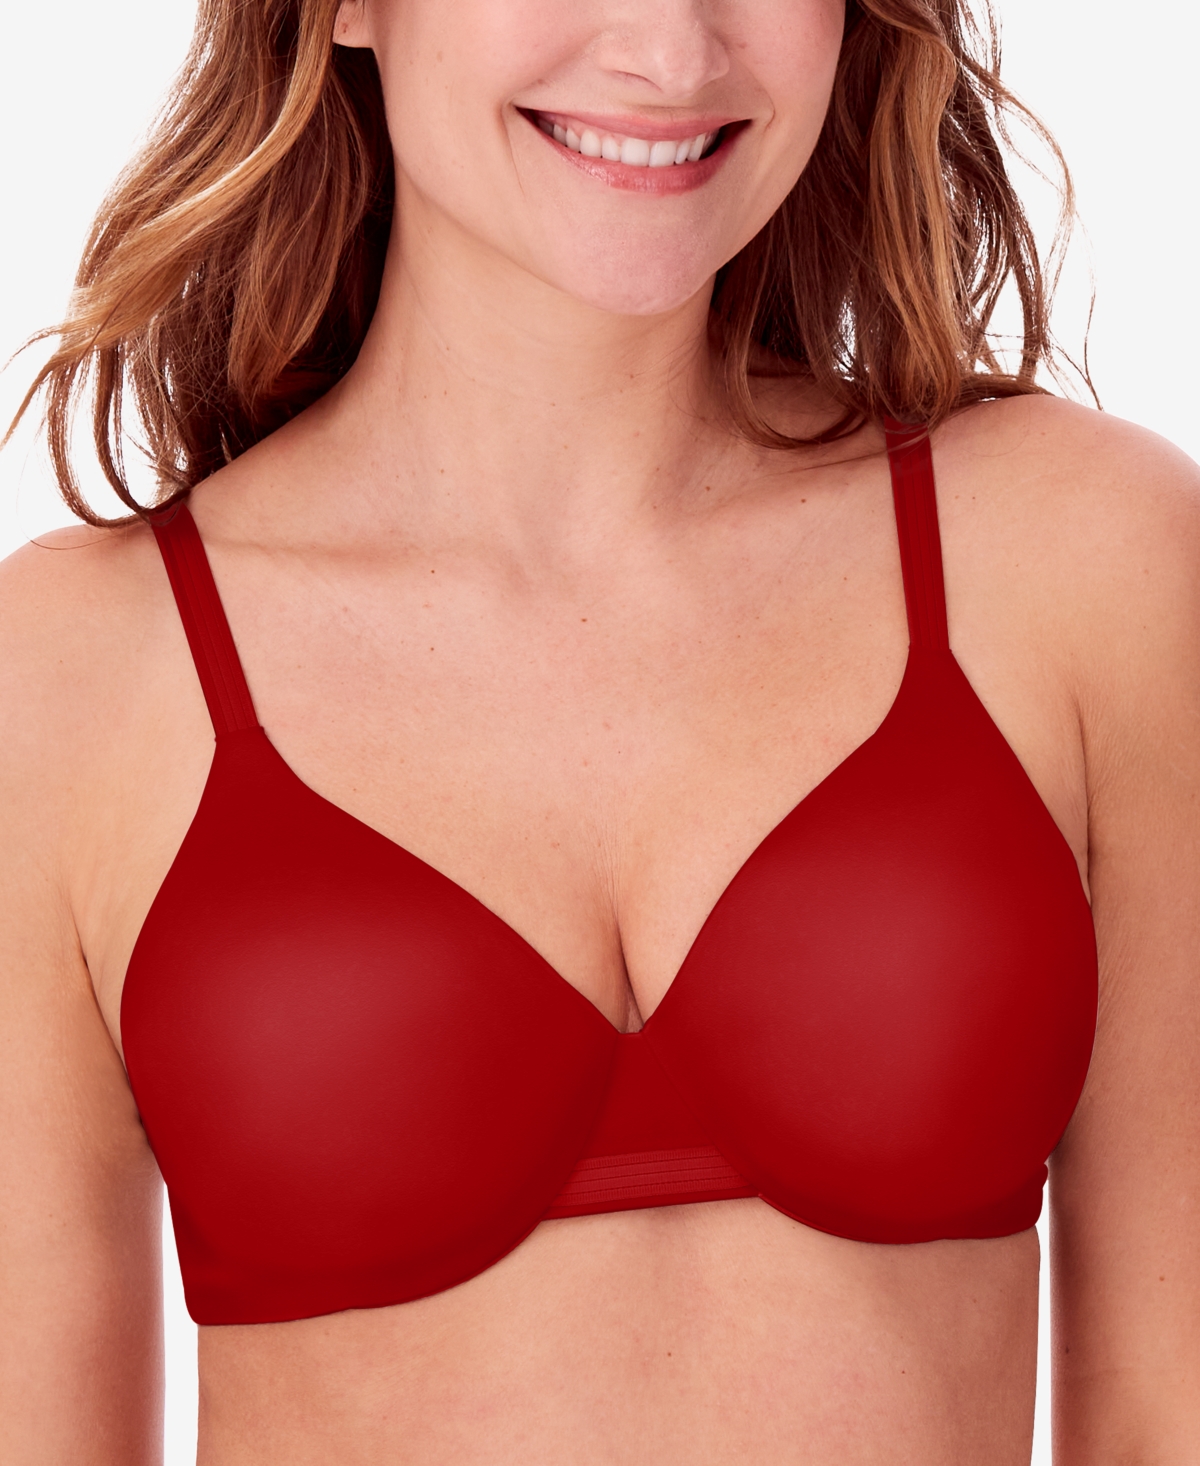 BALI ONE SMOOTH U CONCEALING AND SHAPING UNDERWIRE BRA 3W11